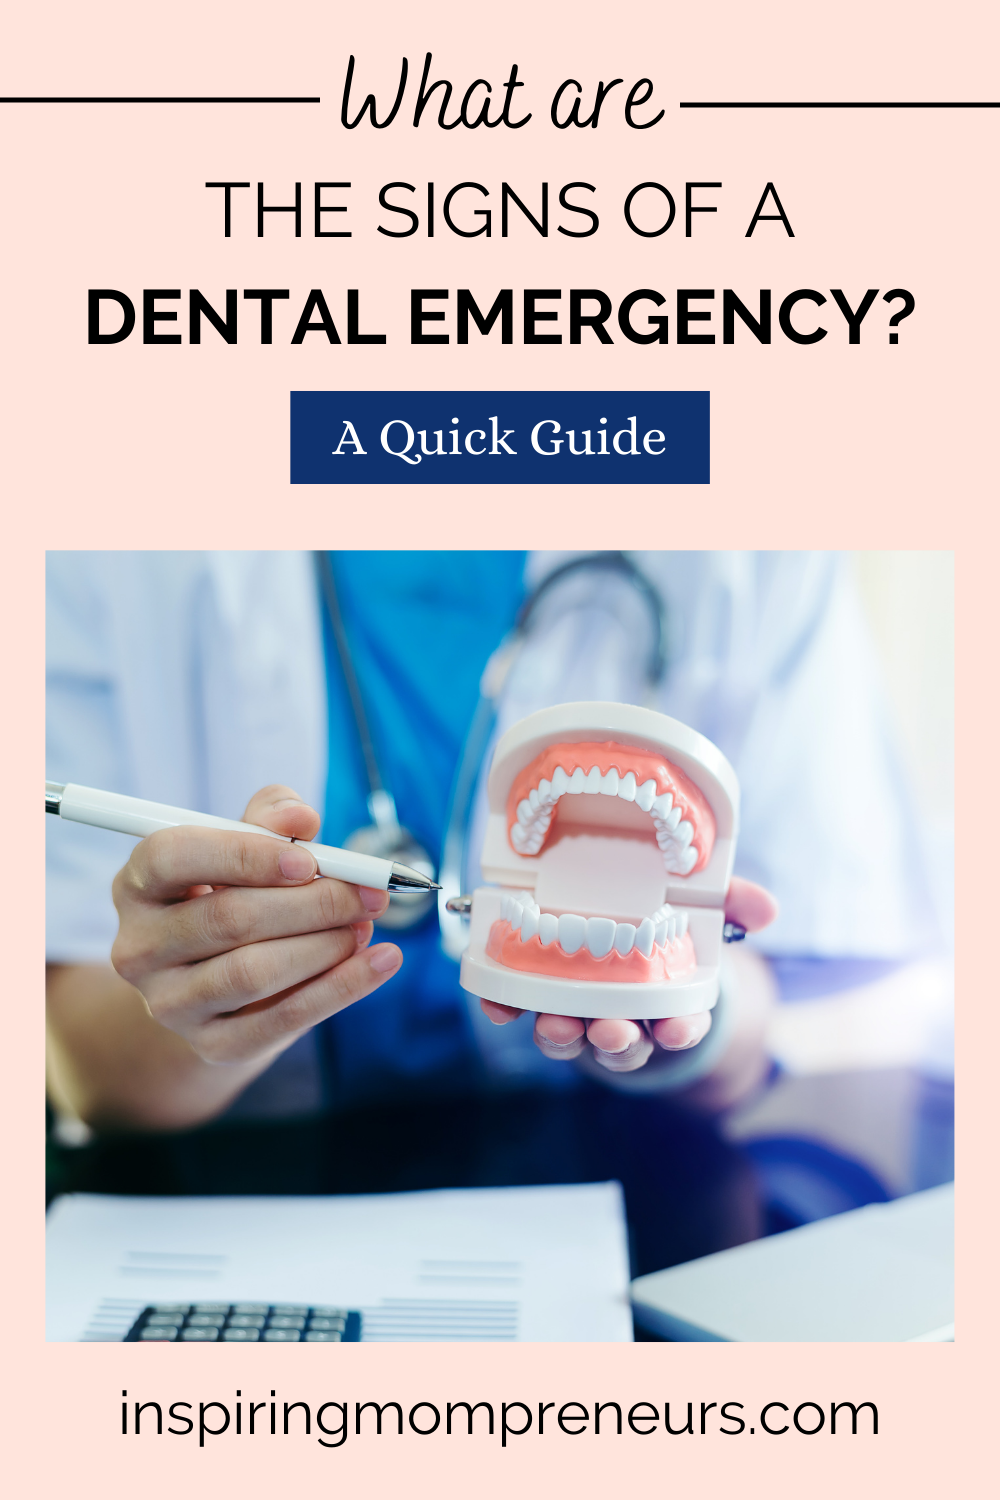 Health-based emergencies are not fun, especially if they are related to dental health. But what are the signs of a dental emergency? Find out in this post.